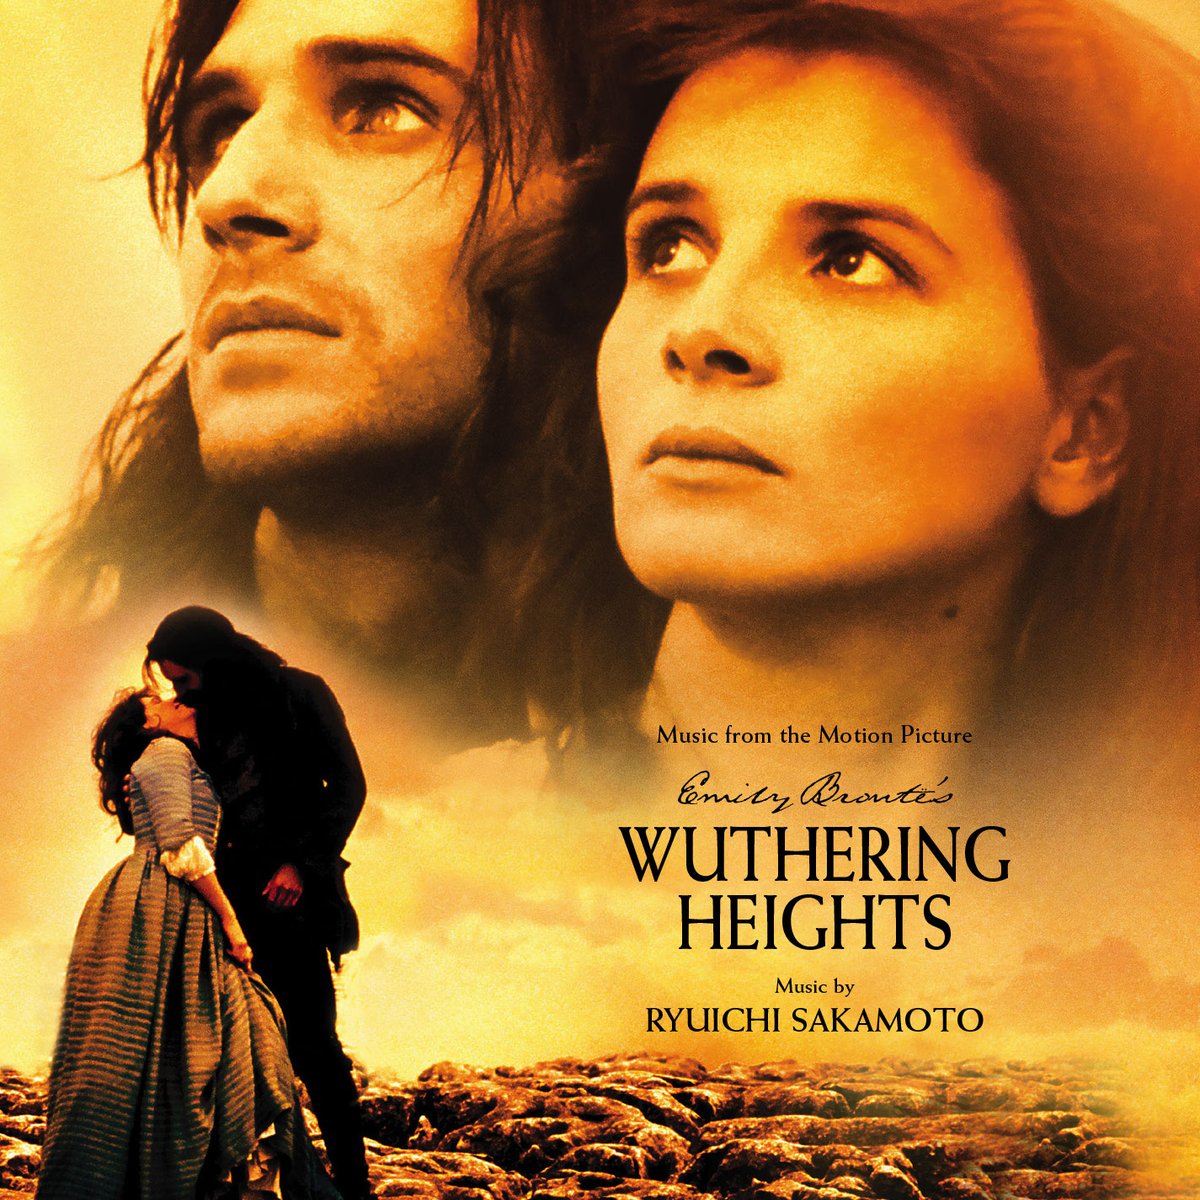 EMILY BRONTË’S WUTHERING HEIGHTS 
Music by Ryuichi Sakamoto 
Limited Edition of 1000 Units 

lalalandrecords.com/emily-brontes-…

@LaLaLandRecords
#ryuichisakamoto 
#skmtnews 
#坂本龍一